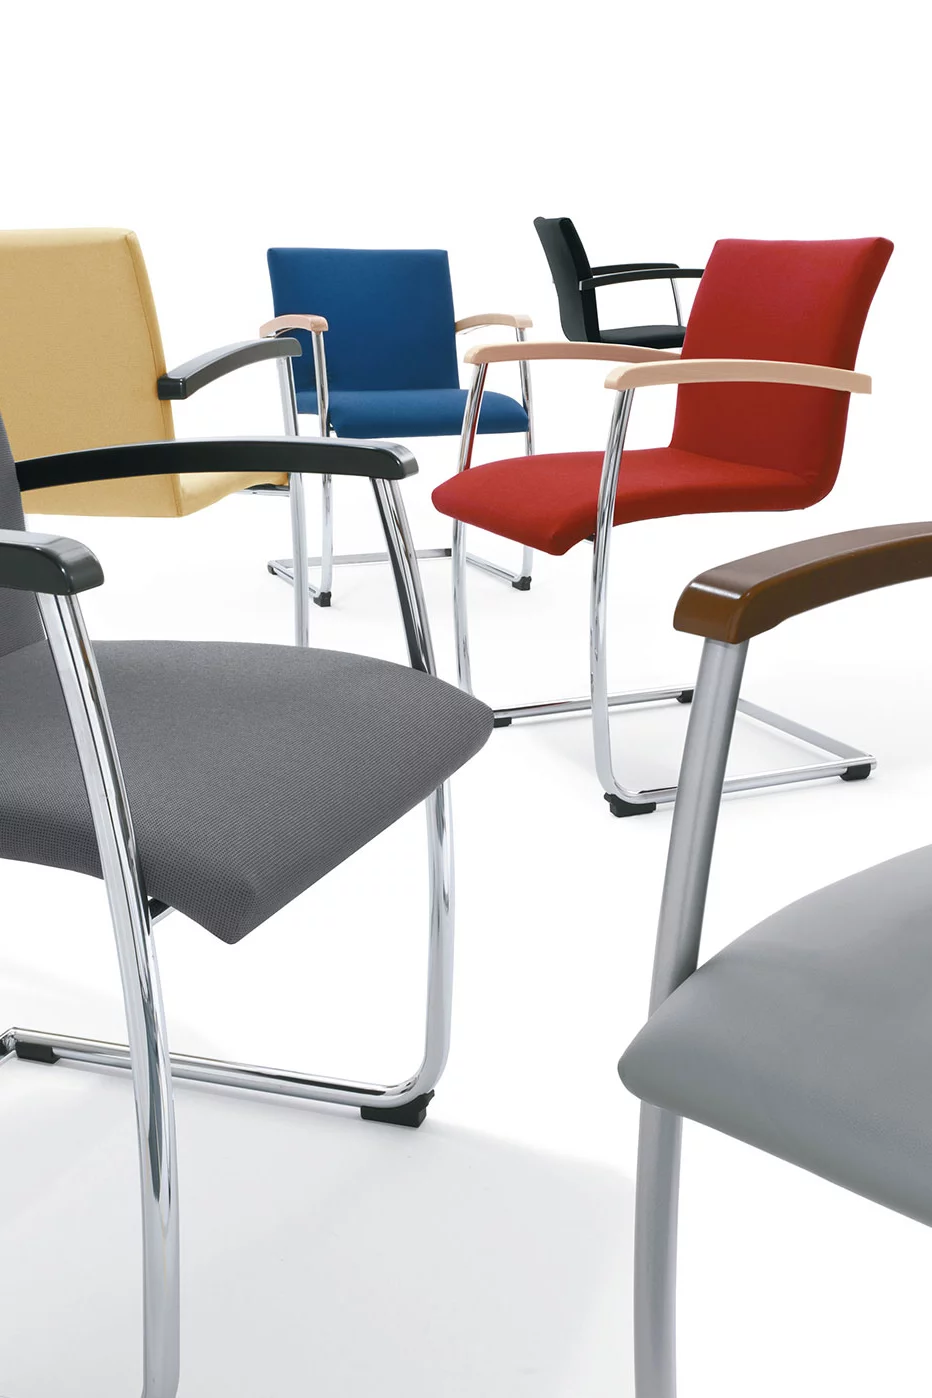 BUG, Upholstered Cantilever chair stackable With armrests  chair, Bene Office furniture, Image 2